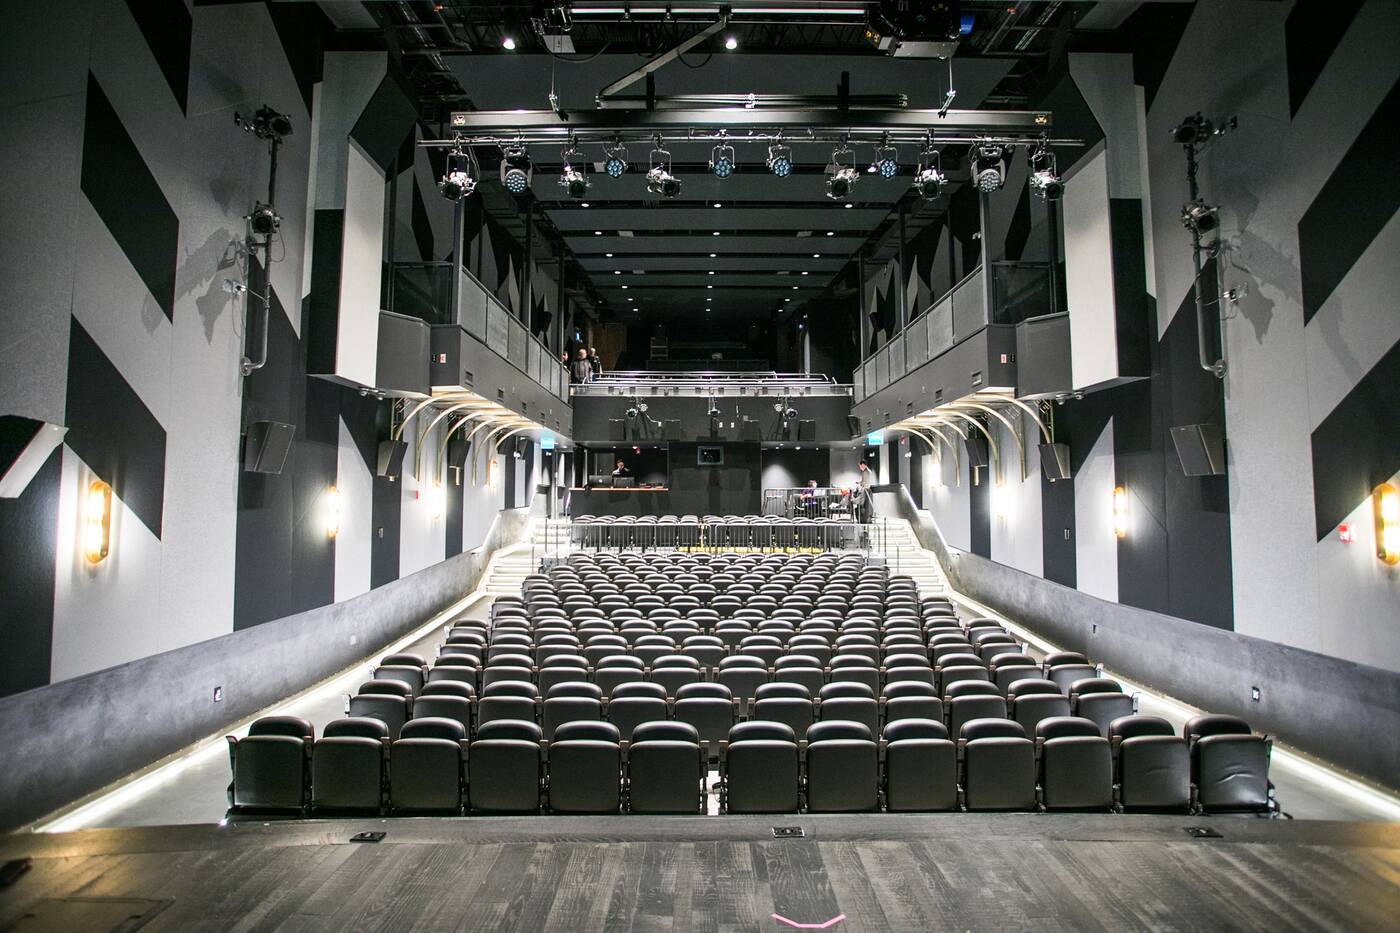 This is what the newly opened Paradise Theatre in Toronto looks like